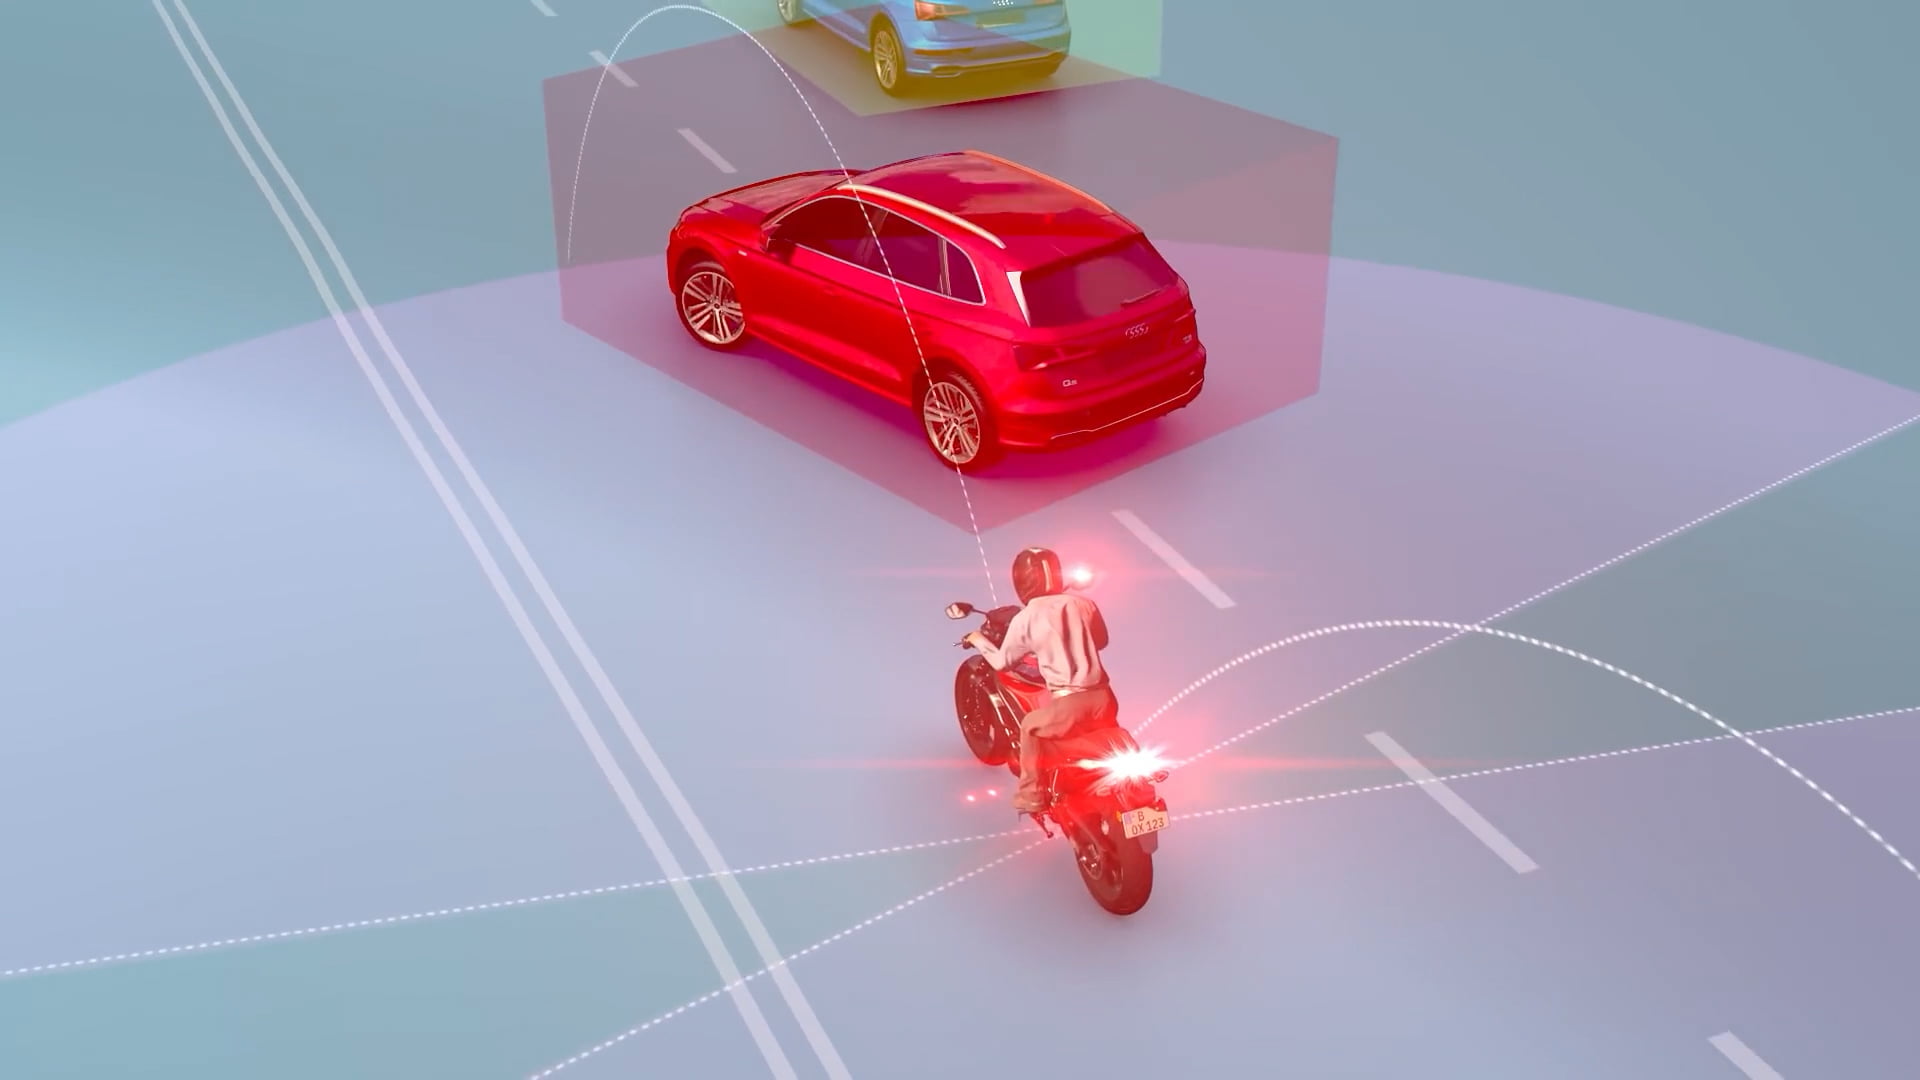 Israeli startup Ride Vision raises USD 7 million to save riders’ lives with collision-aversion tech